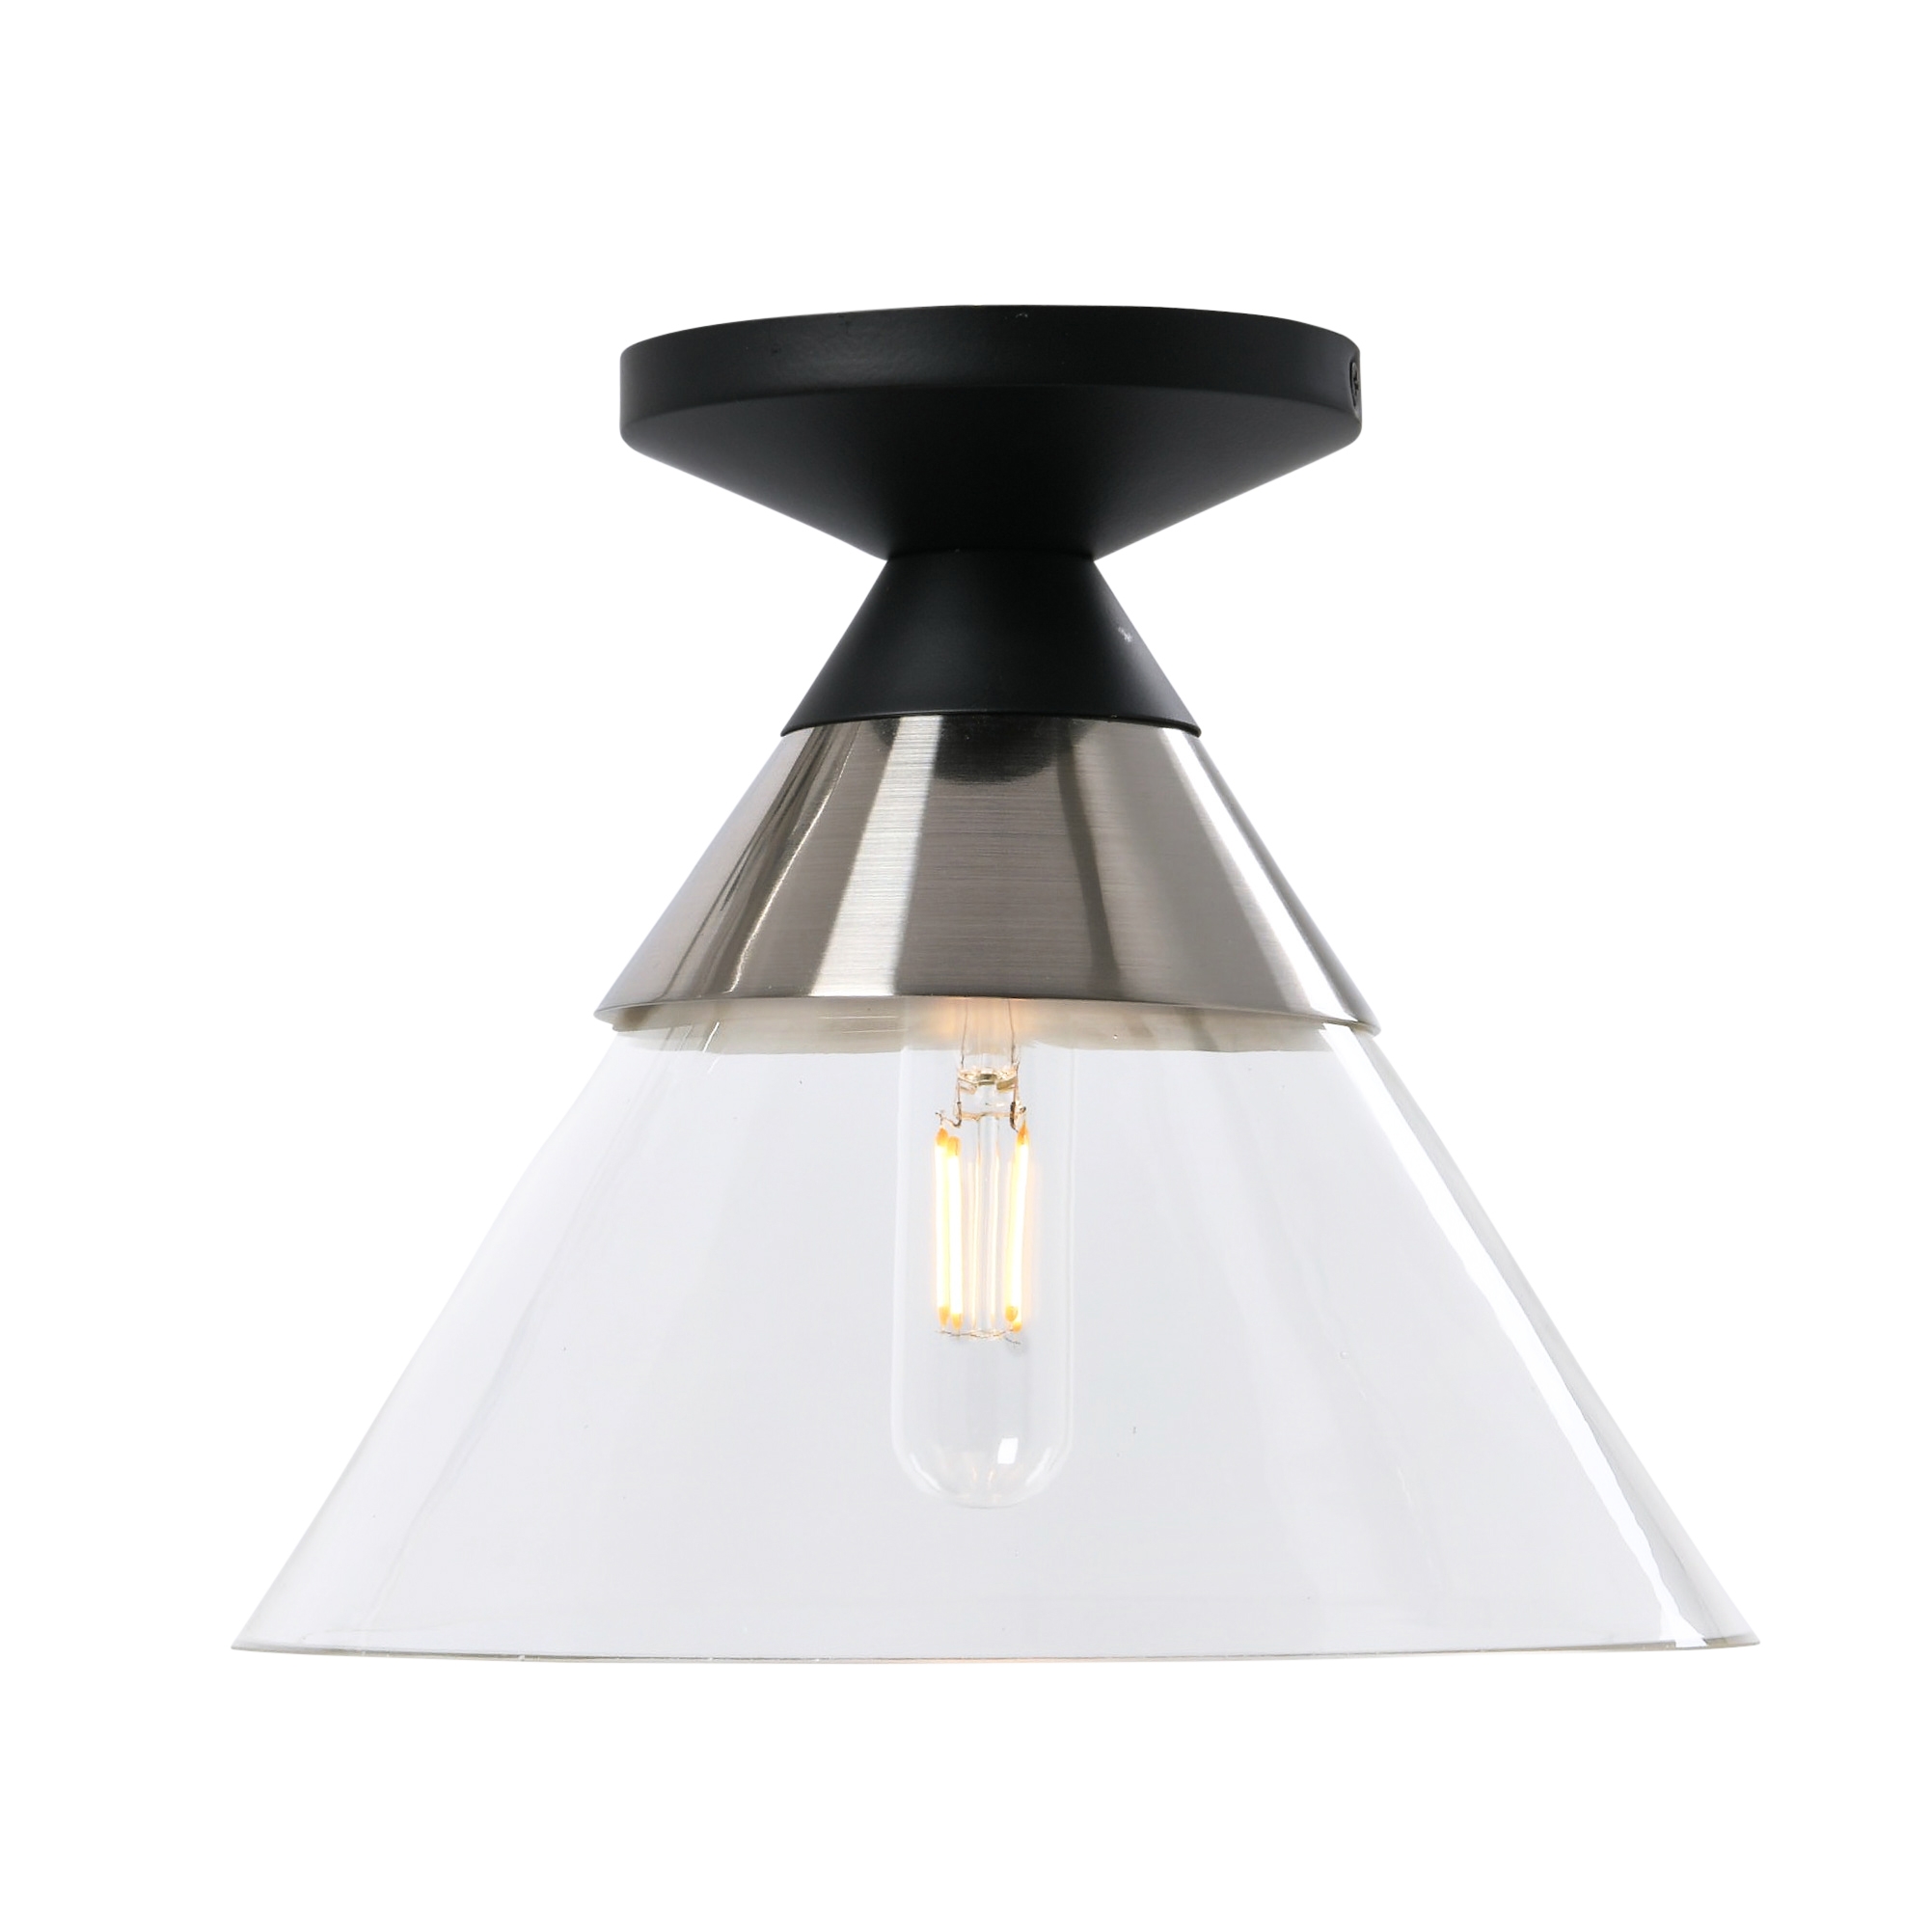 Robert Stevenson Lighting Theo - Metal and Conical Glass Flush Mount Ceiling Light, Matte Black and Brushed Nickel - Image 0